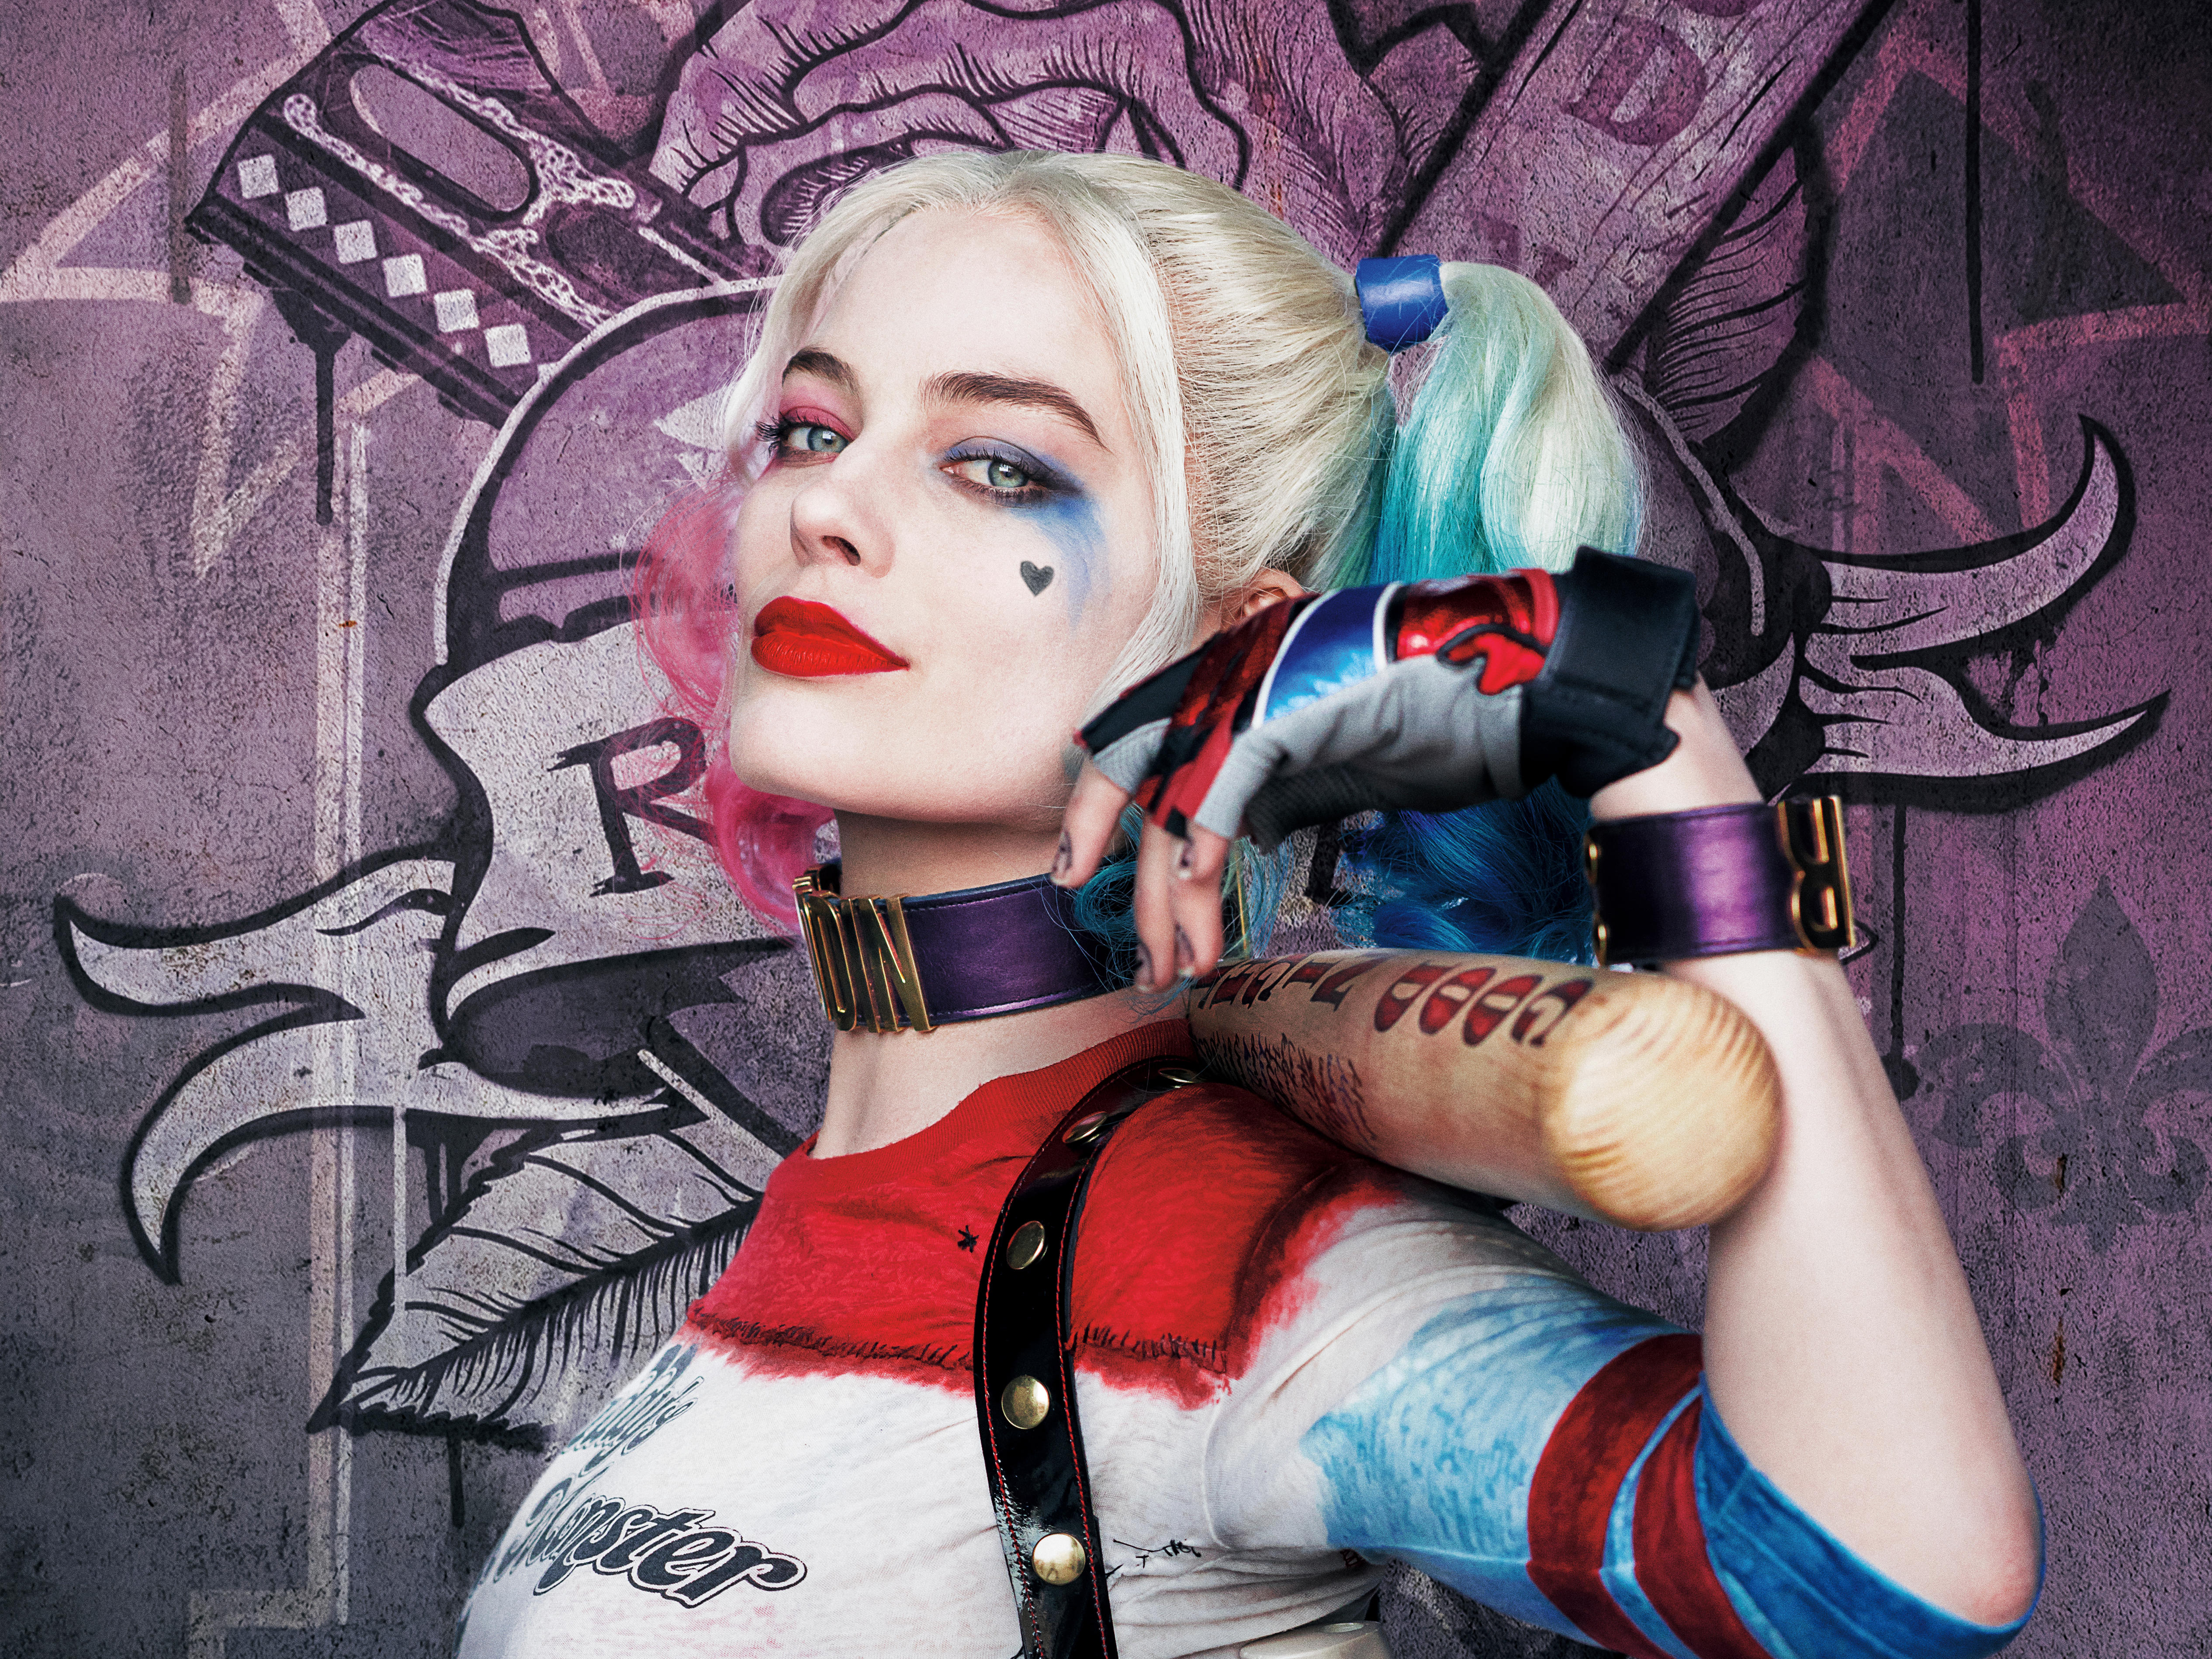 margot robbie, movie, suicide squad, harley quinn, harleen quinzel, dc comics, two toned hair iphone wallpaper